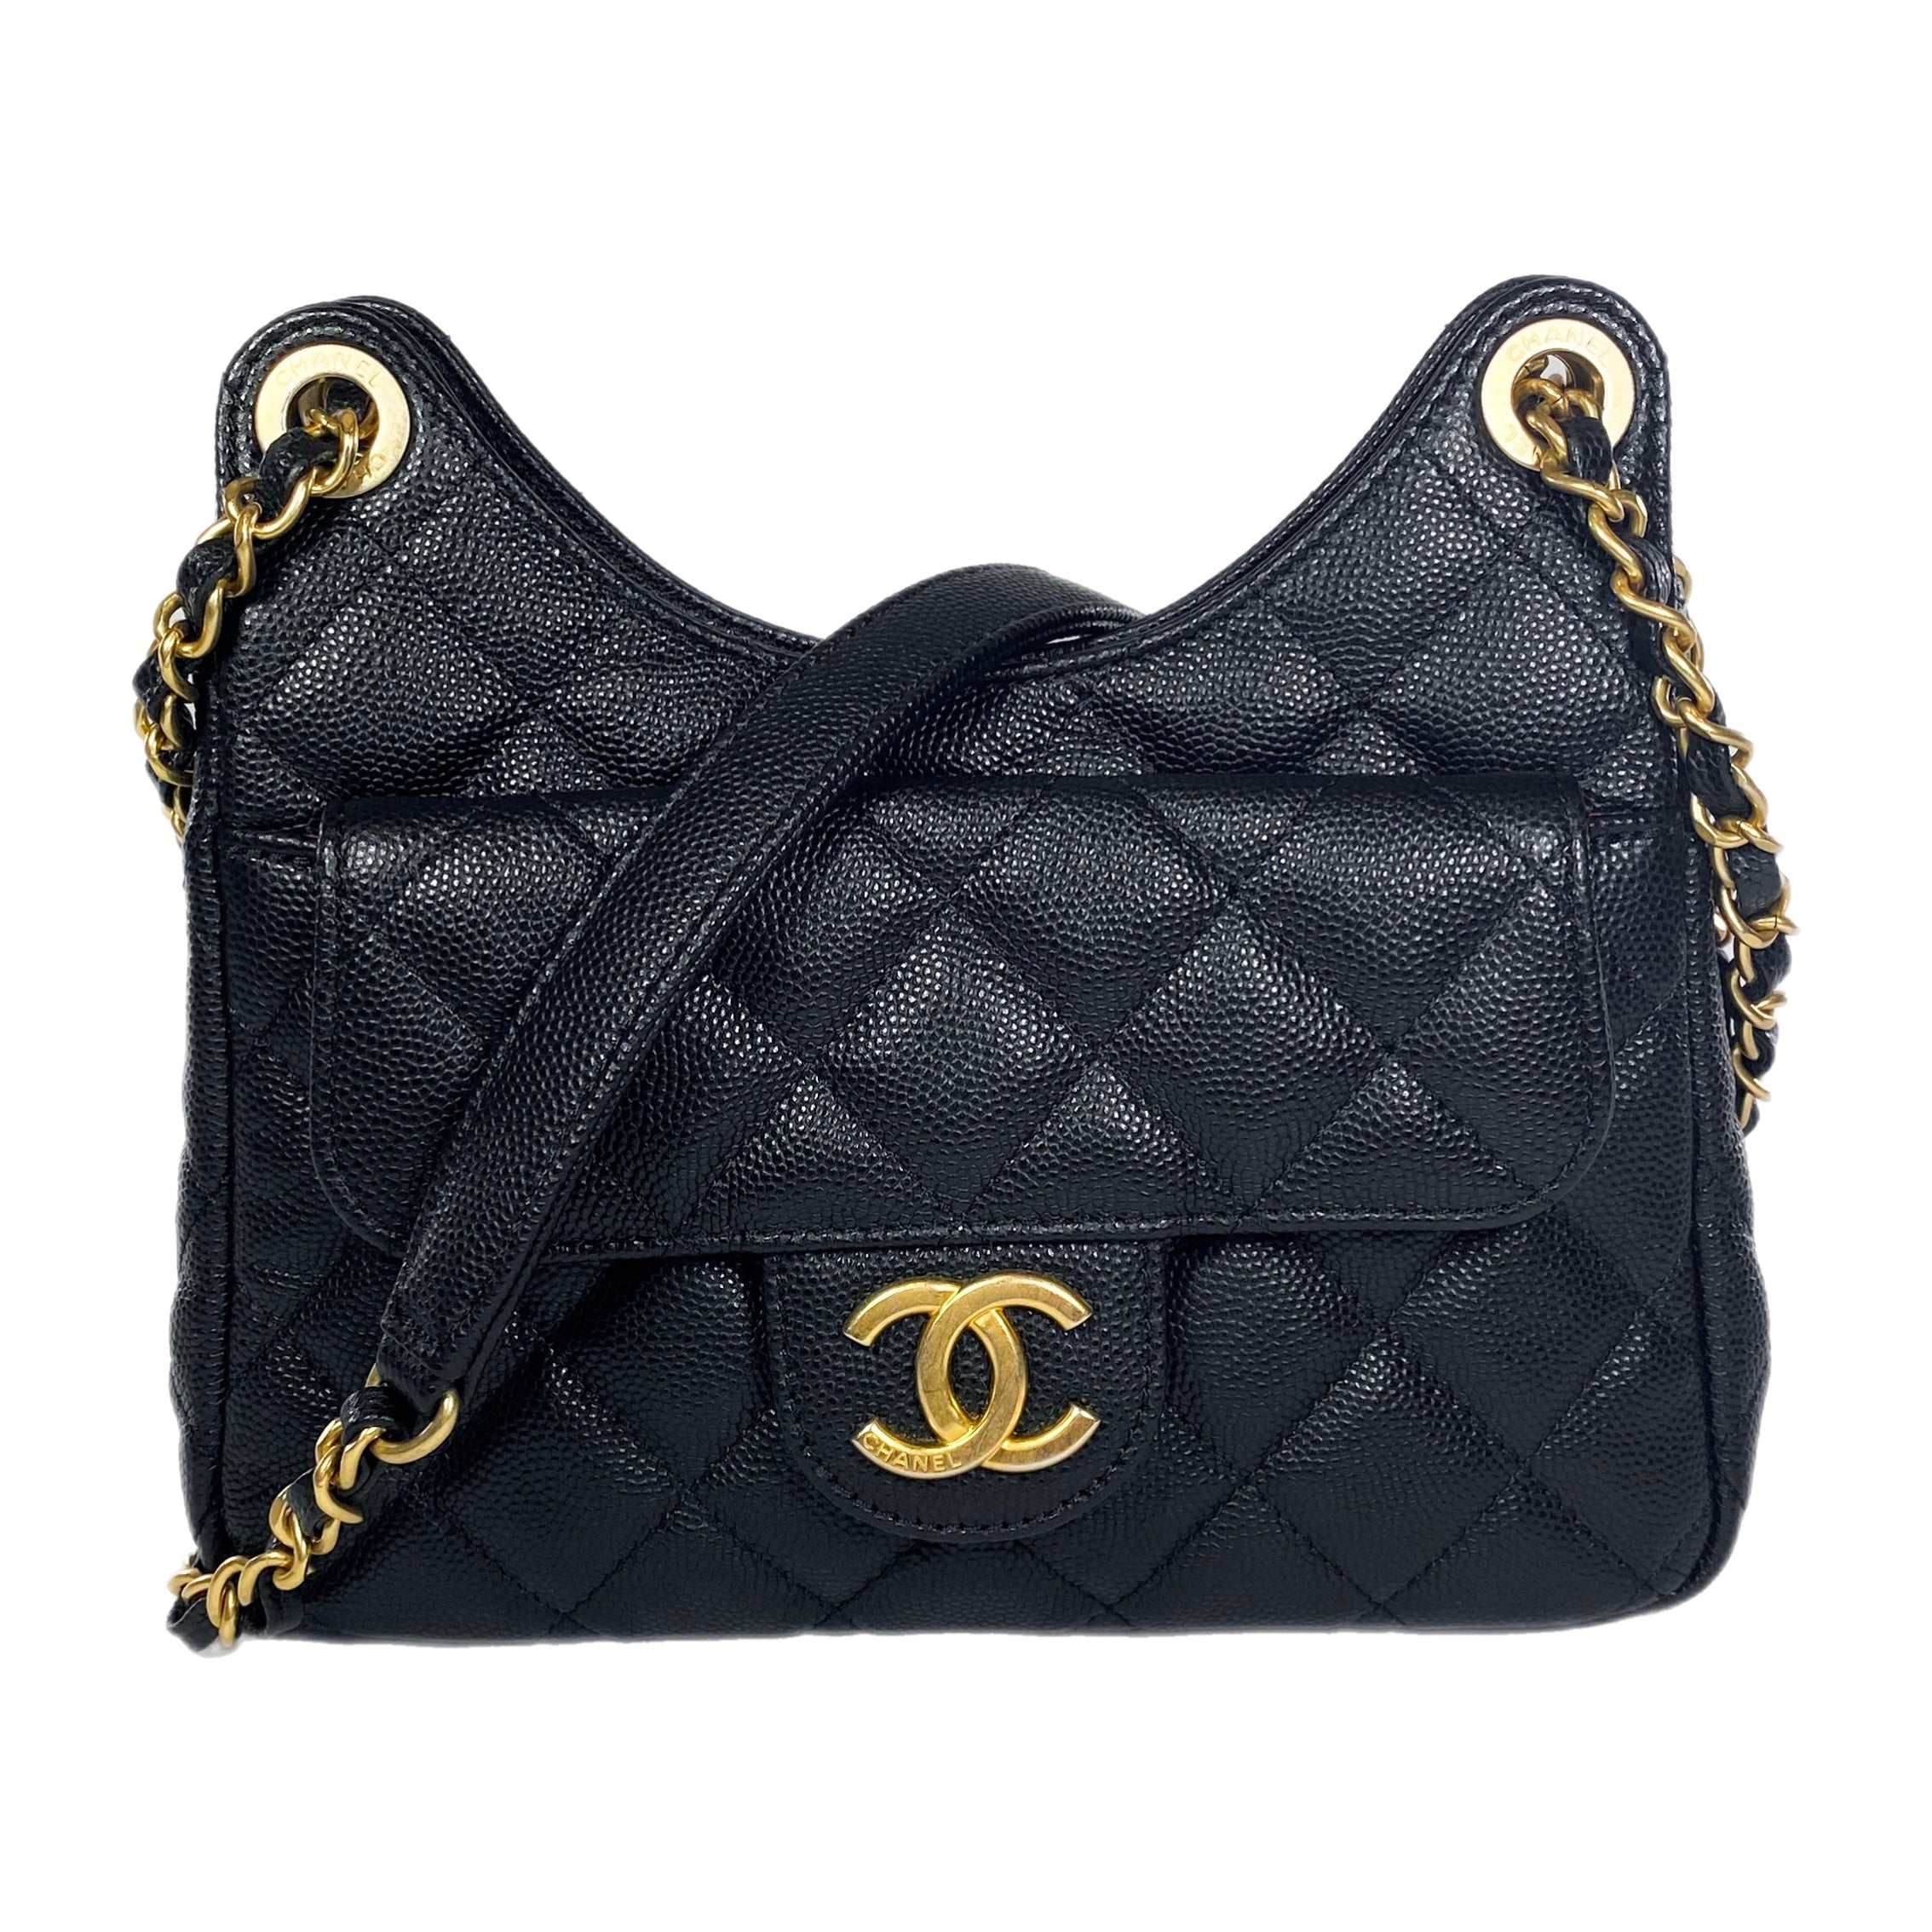 chanel bags leather